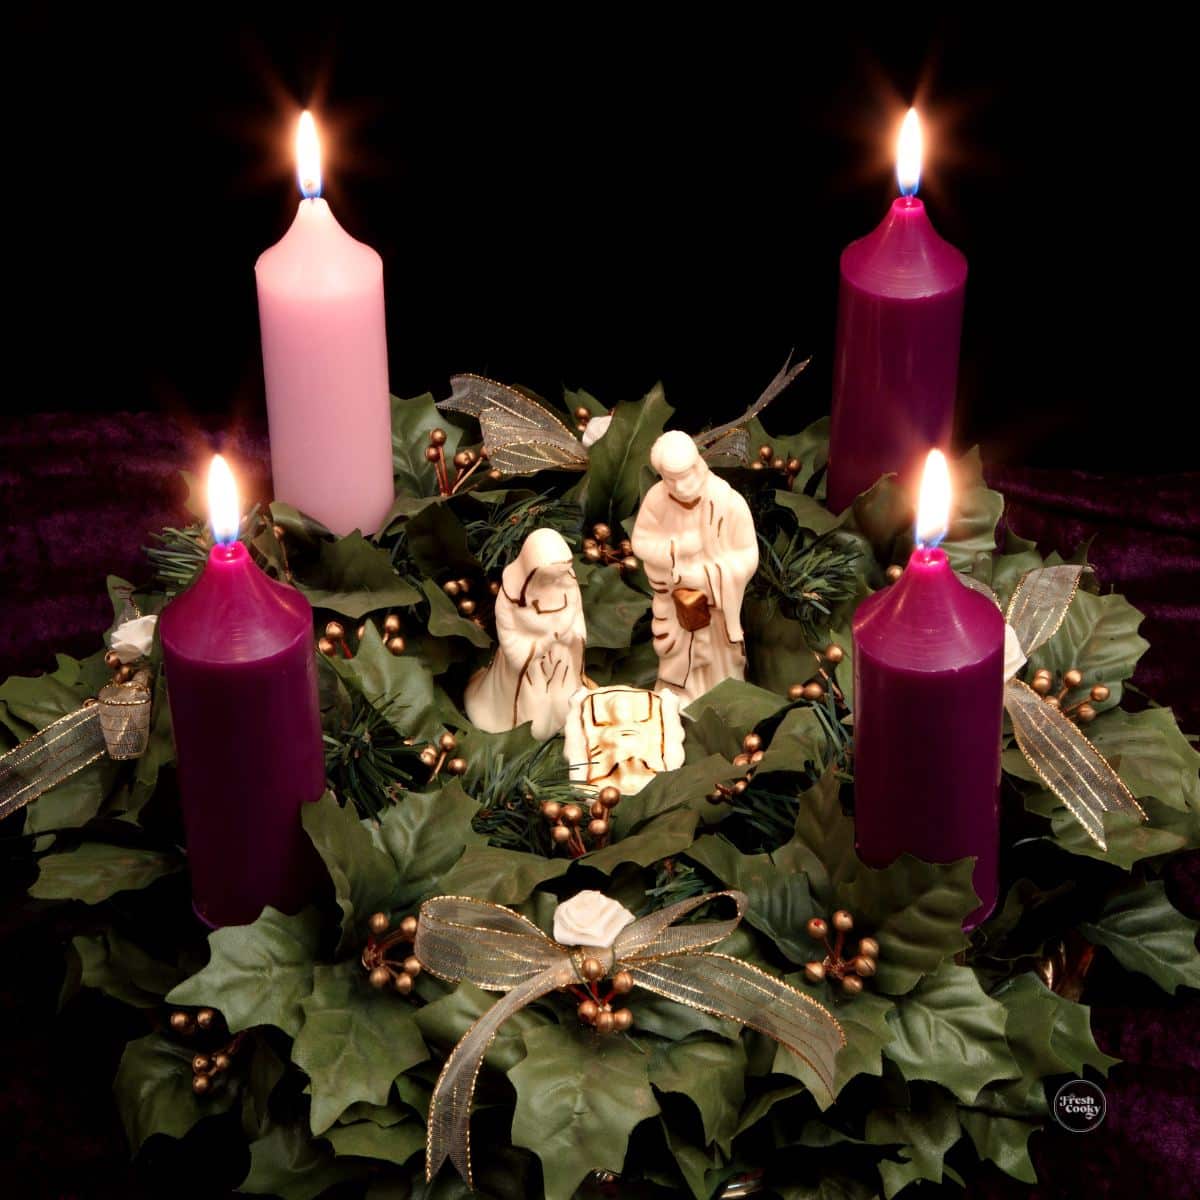 Advent wreath with lit candles and a nativity in the center.